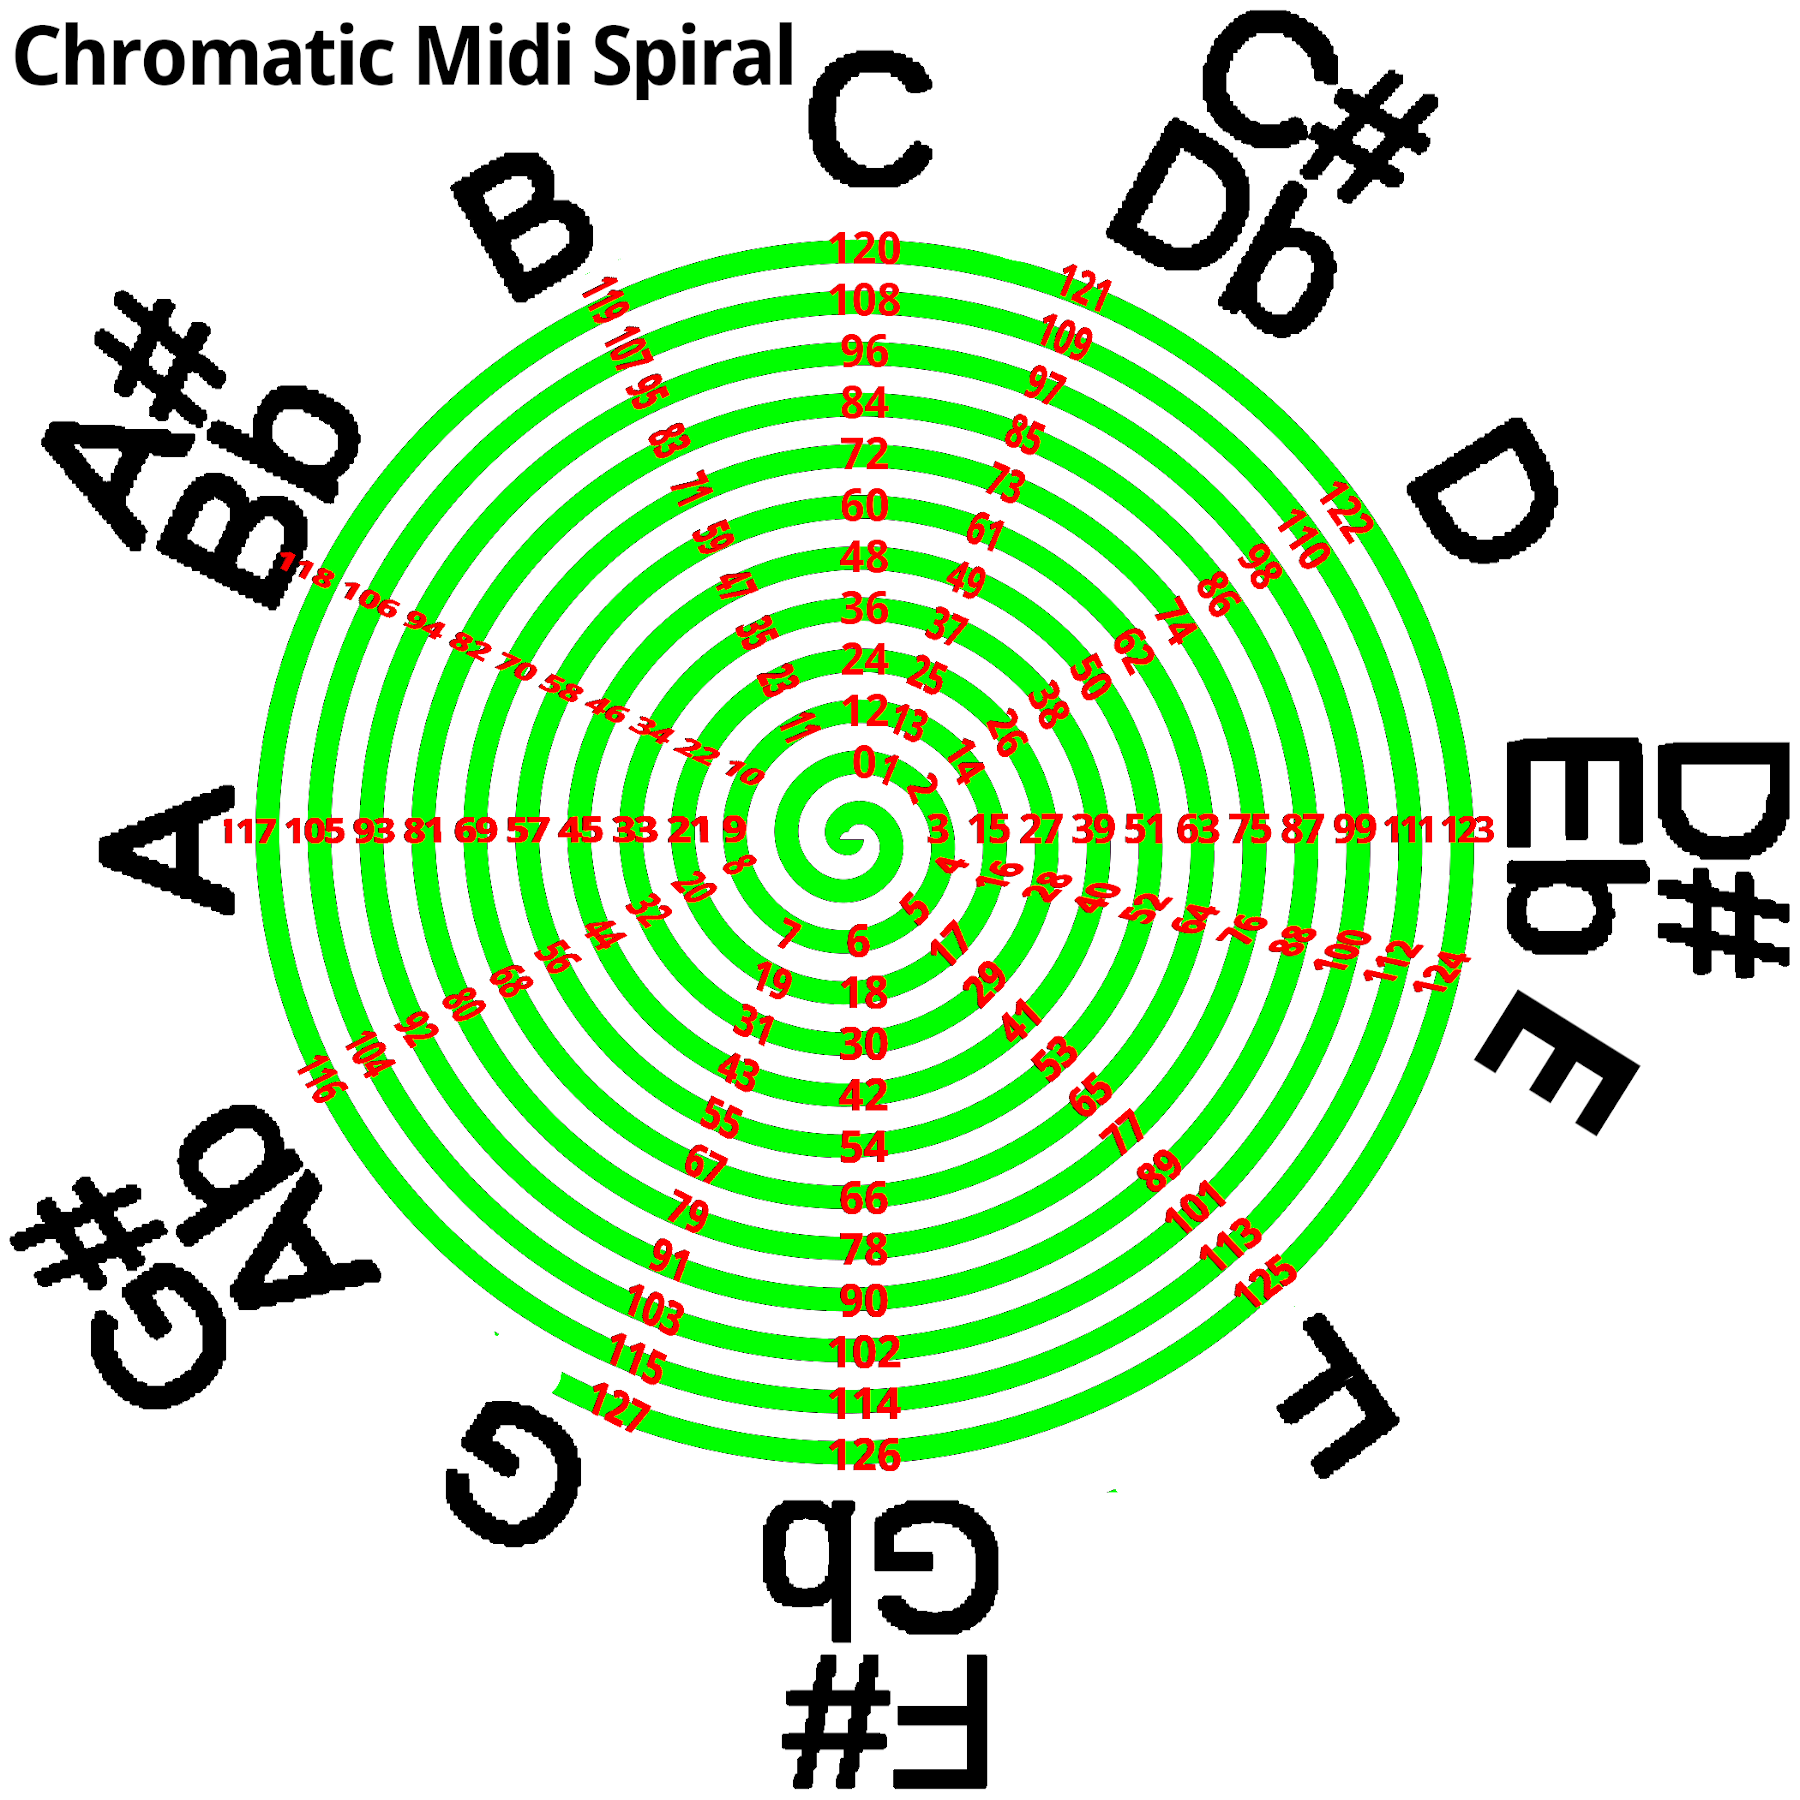 MidiChromaticSpiral-g-trunk-before-merging-down-SMALL.png